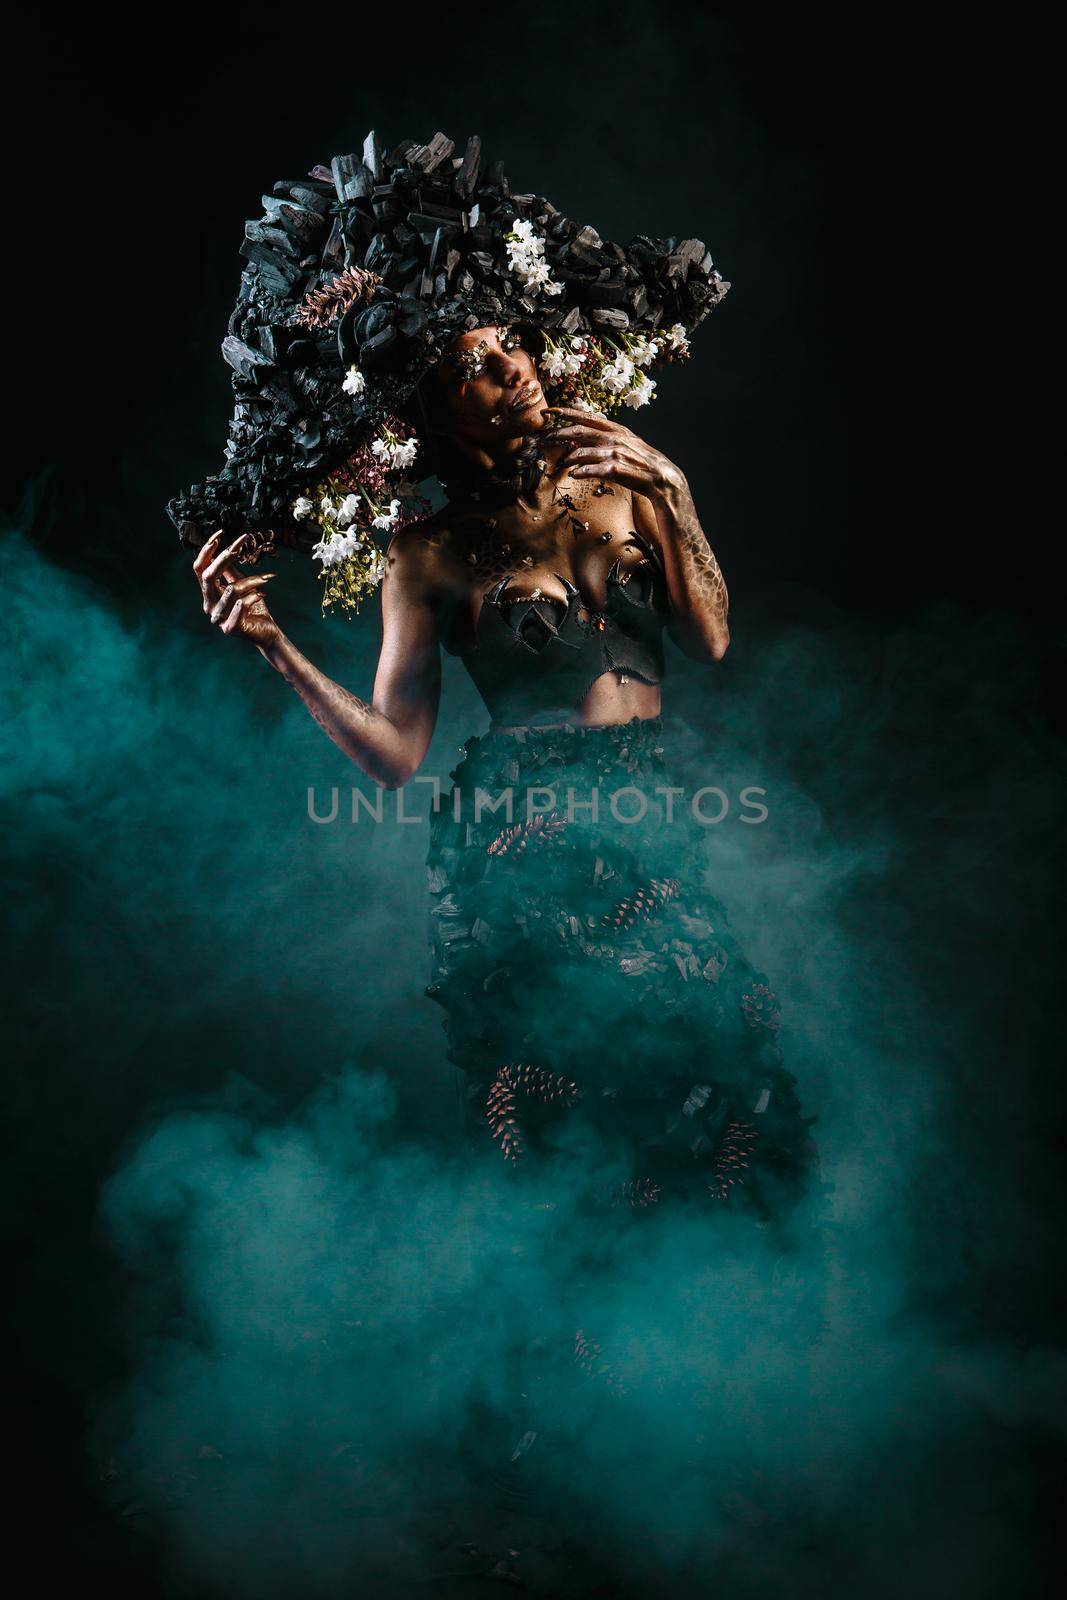 Portrait of a model in a headdress and dress made of coal. There is green smoke behind the model by deandy